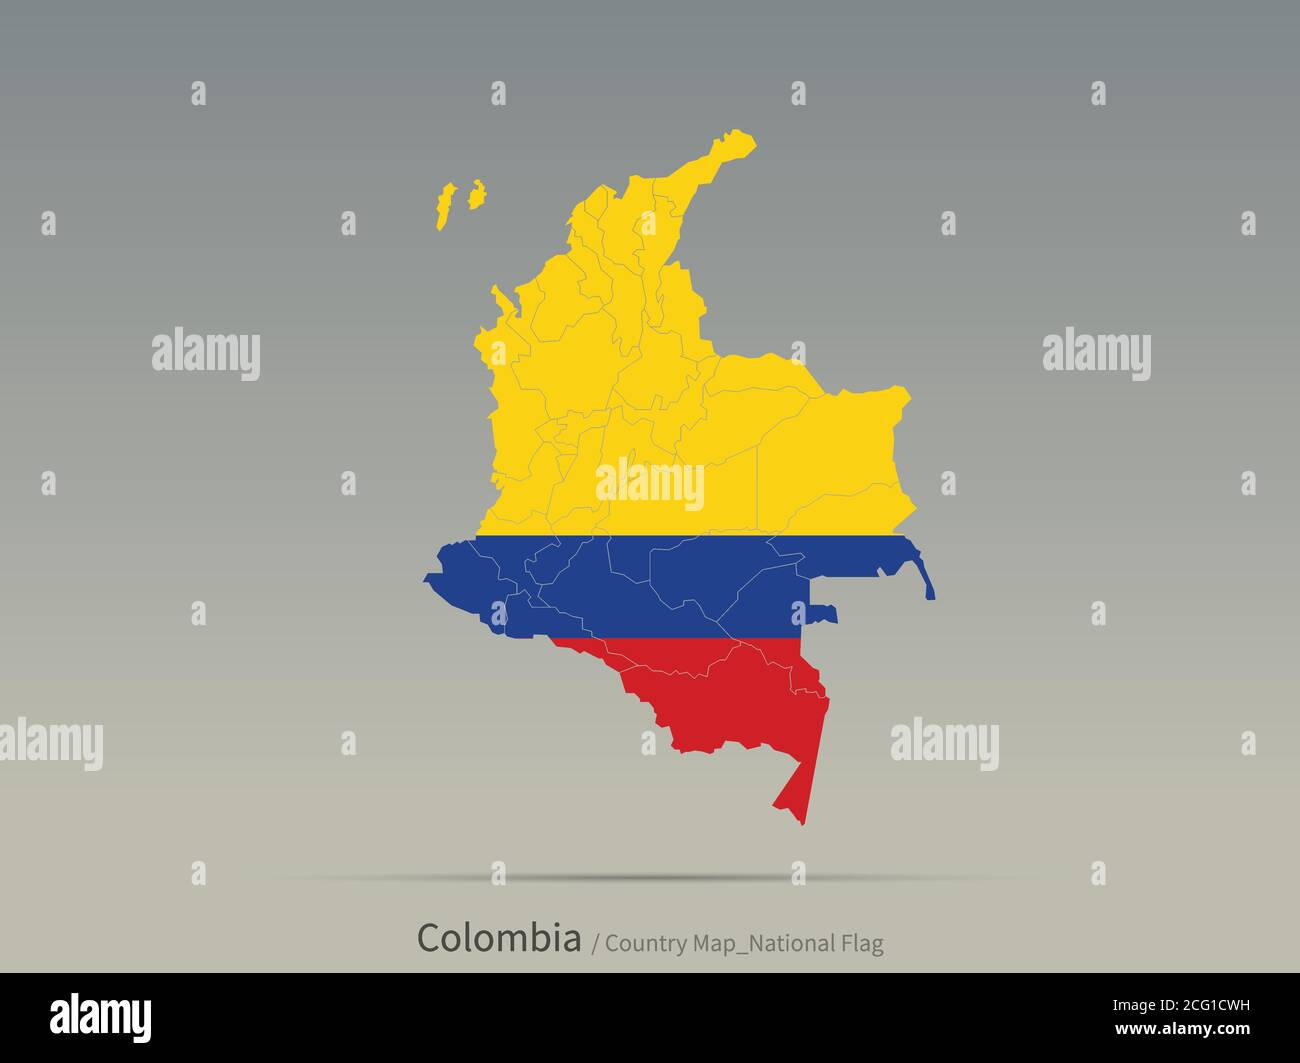 Colombia Flag Isolated on Map. South american countries map and flag. Stock Vector